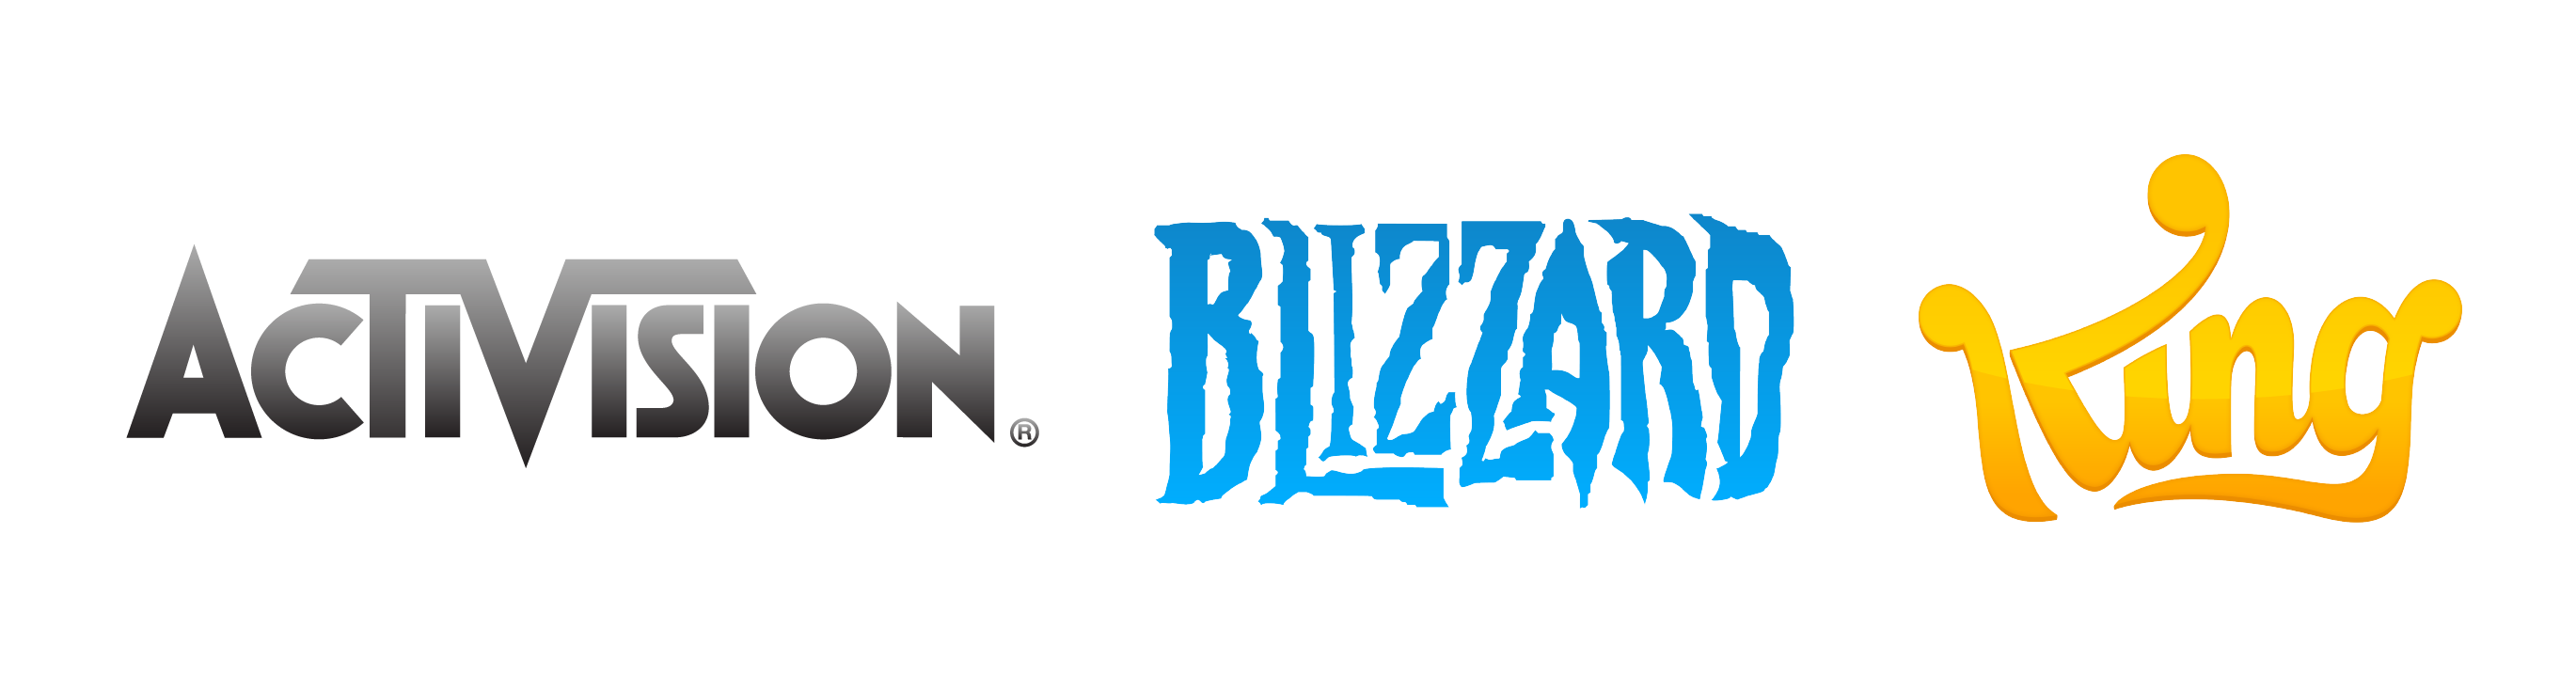 Activision Blizzard King